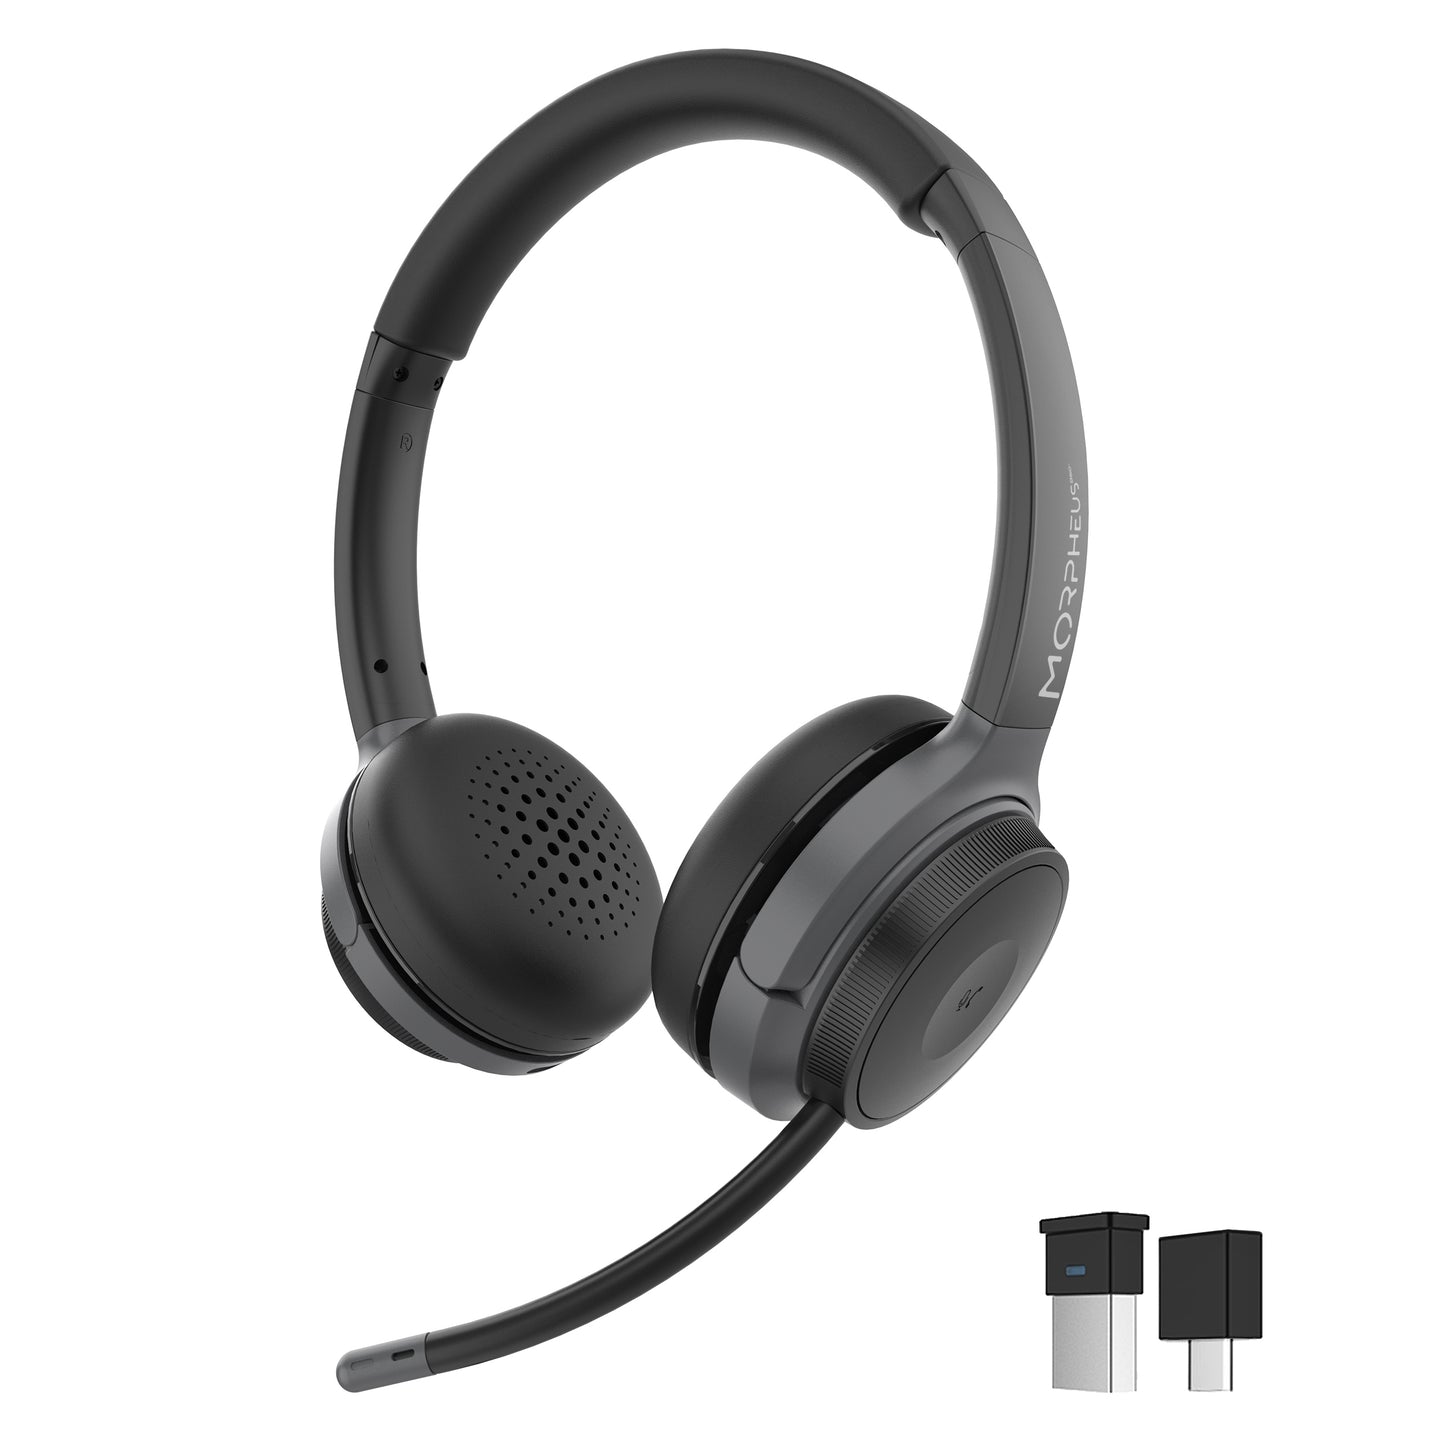 Front profile of the Advantage Wireless Headset with padded headband and Memory foam ear cushions.  Image shows USB A Receiver & USB C Adapter so you can connect the headset to Computers or tablets without Bluetooth.